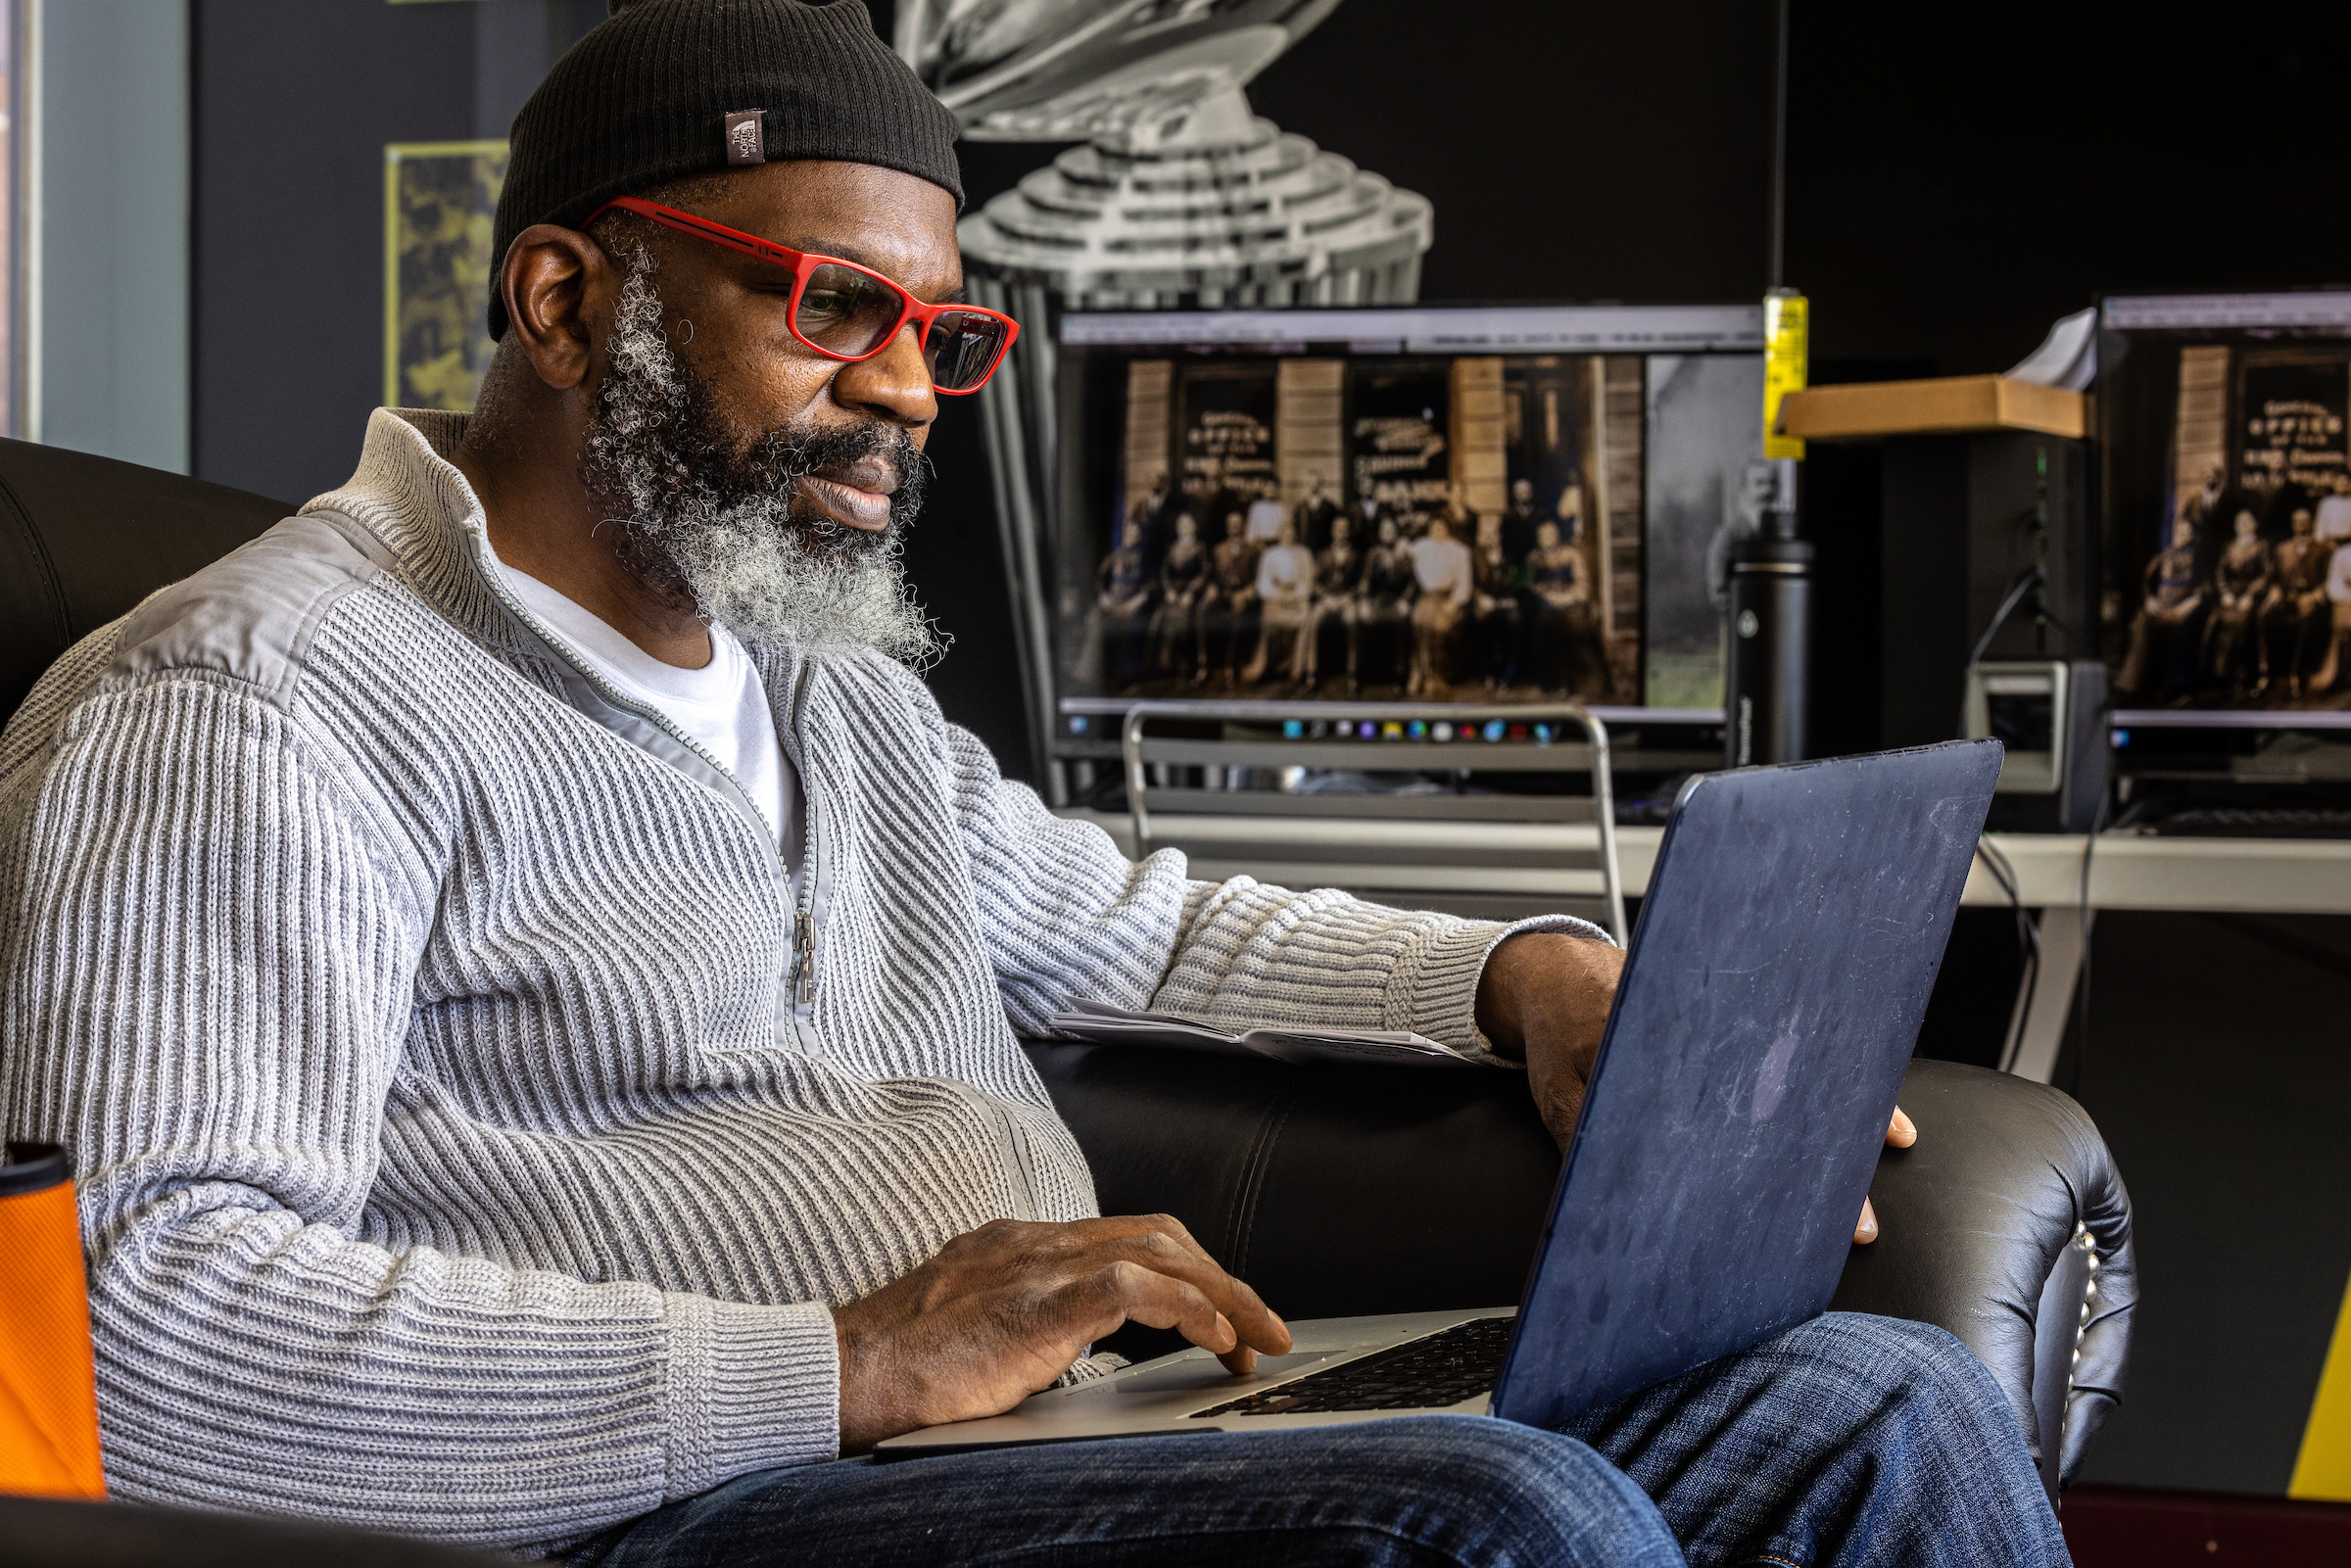 Black man wearing hat and red glasses sitting in chair looking at laptop